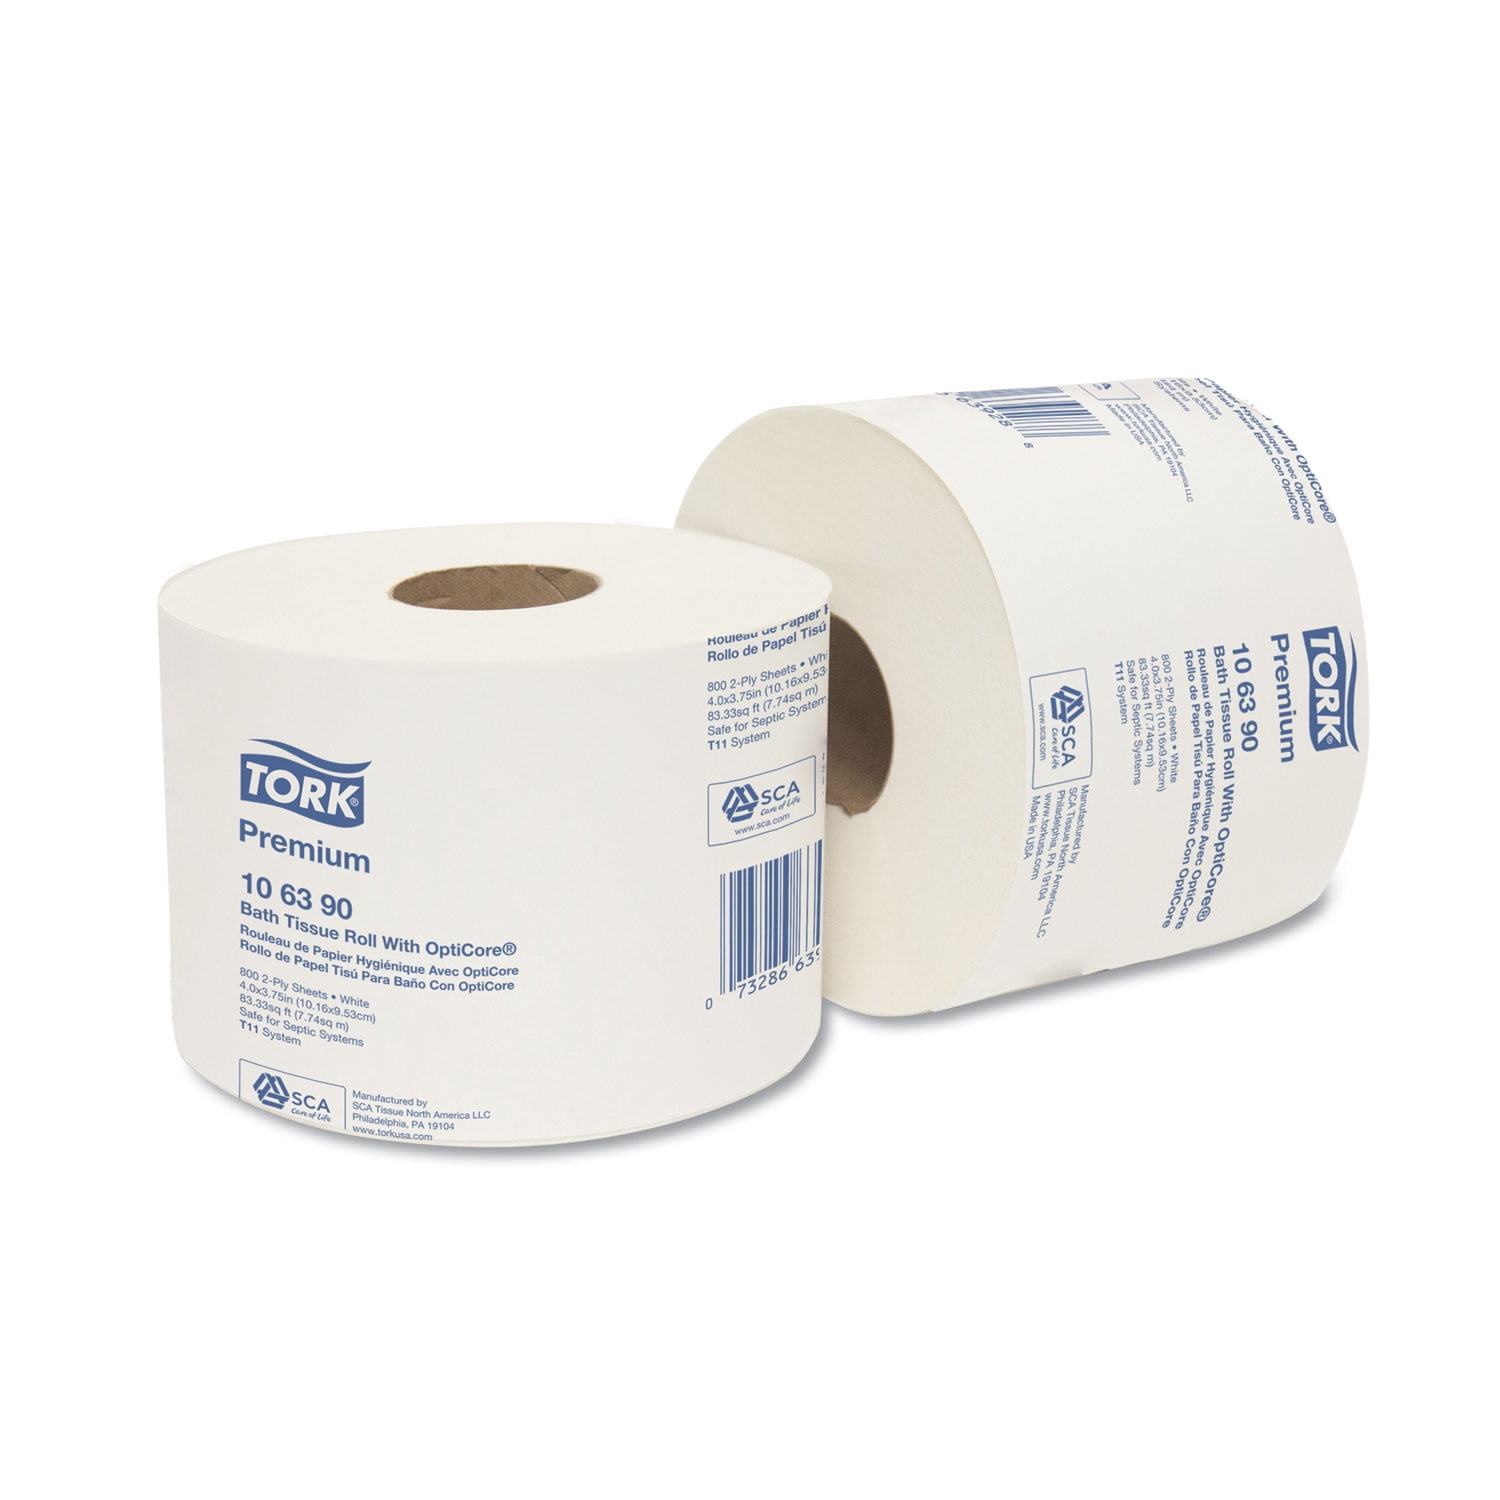 Tork Universal T11 2-Ply Mid-Size 865 Sheet Toilet Paper Roll with Opticore  - 36/Case